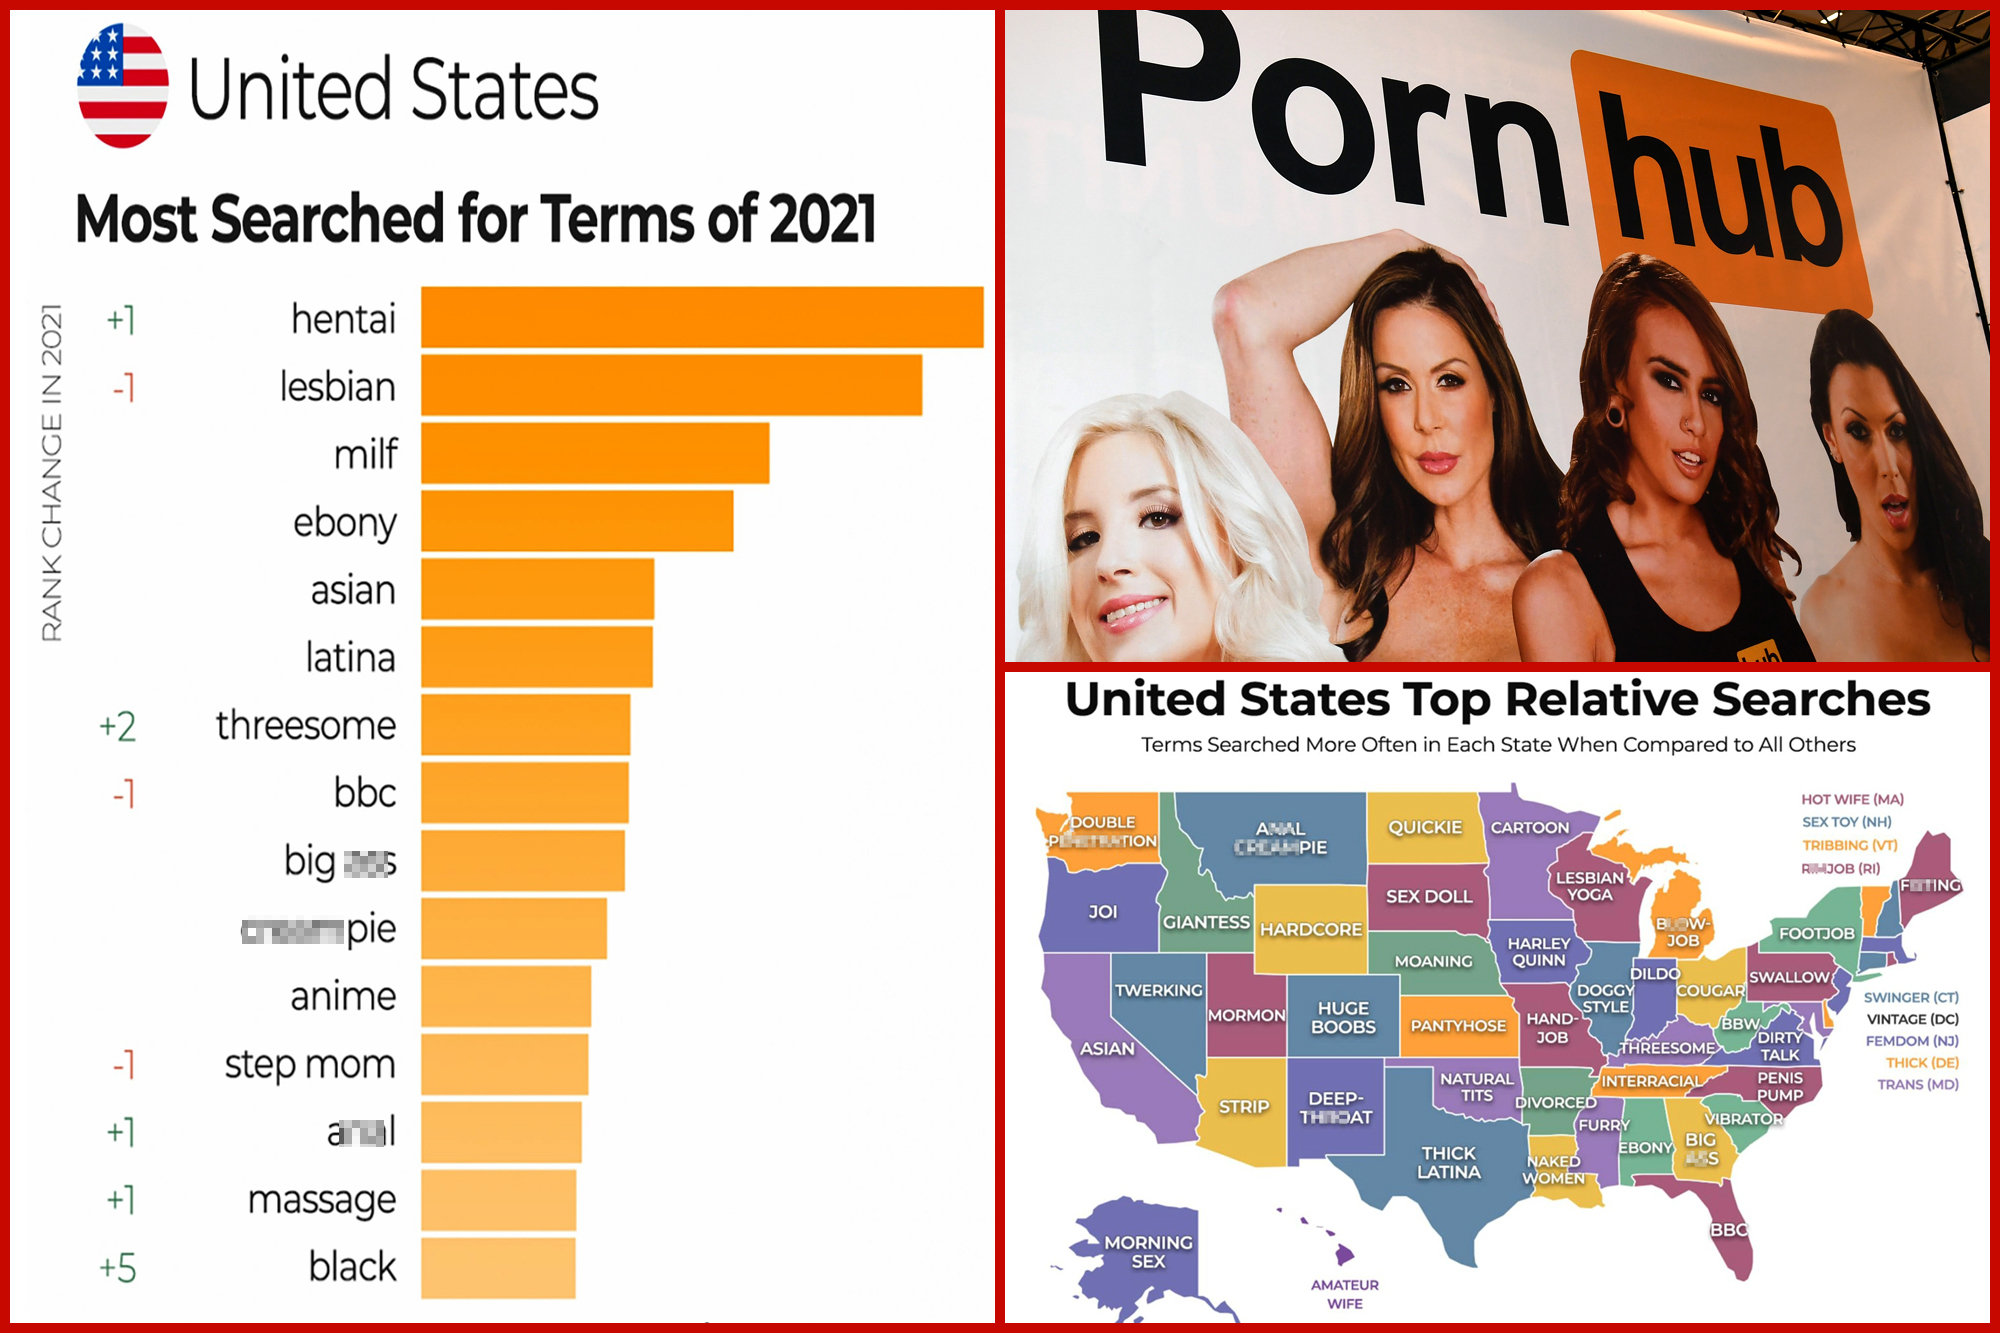 dafna hochman recommends Porn Hub Top Rated